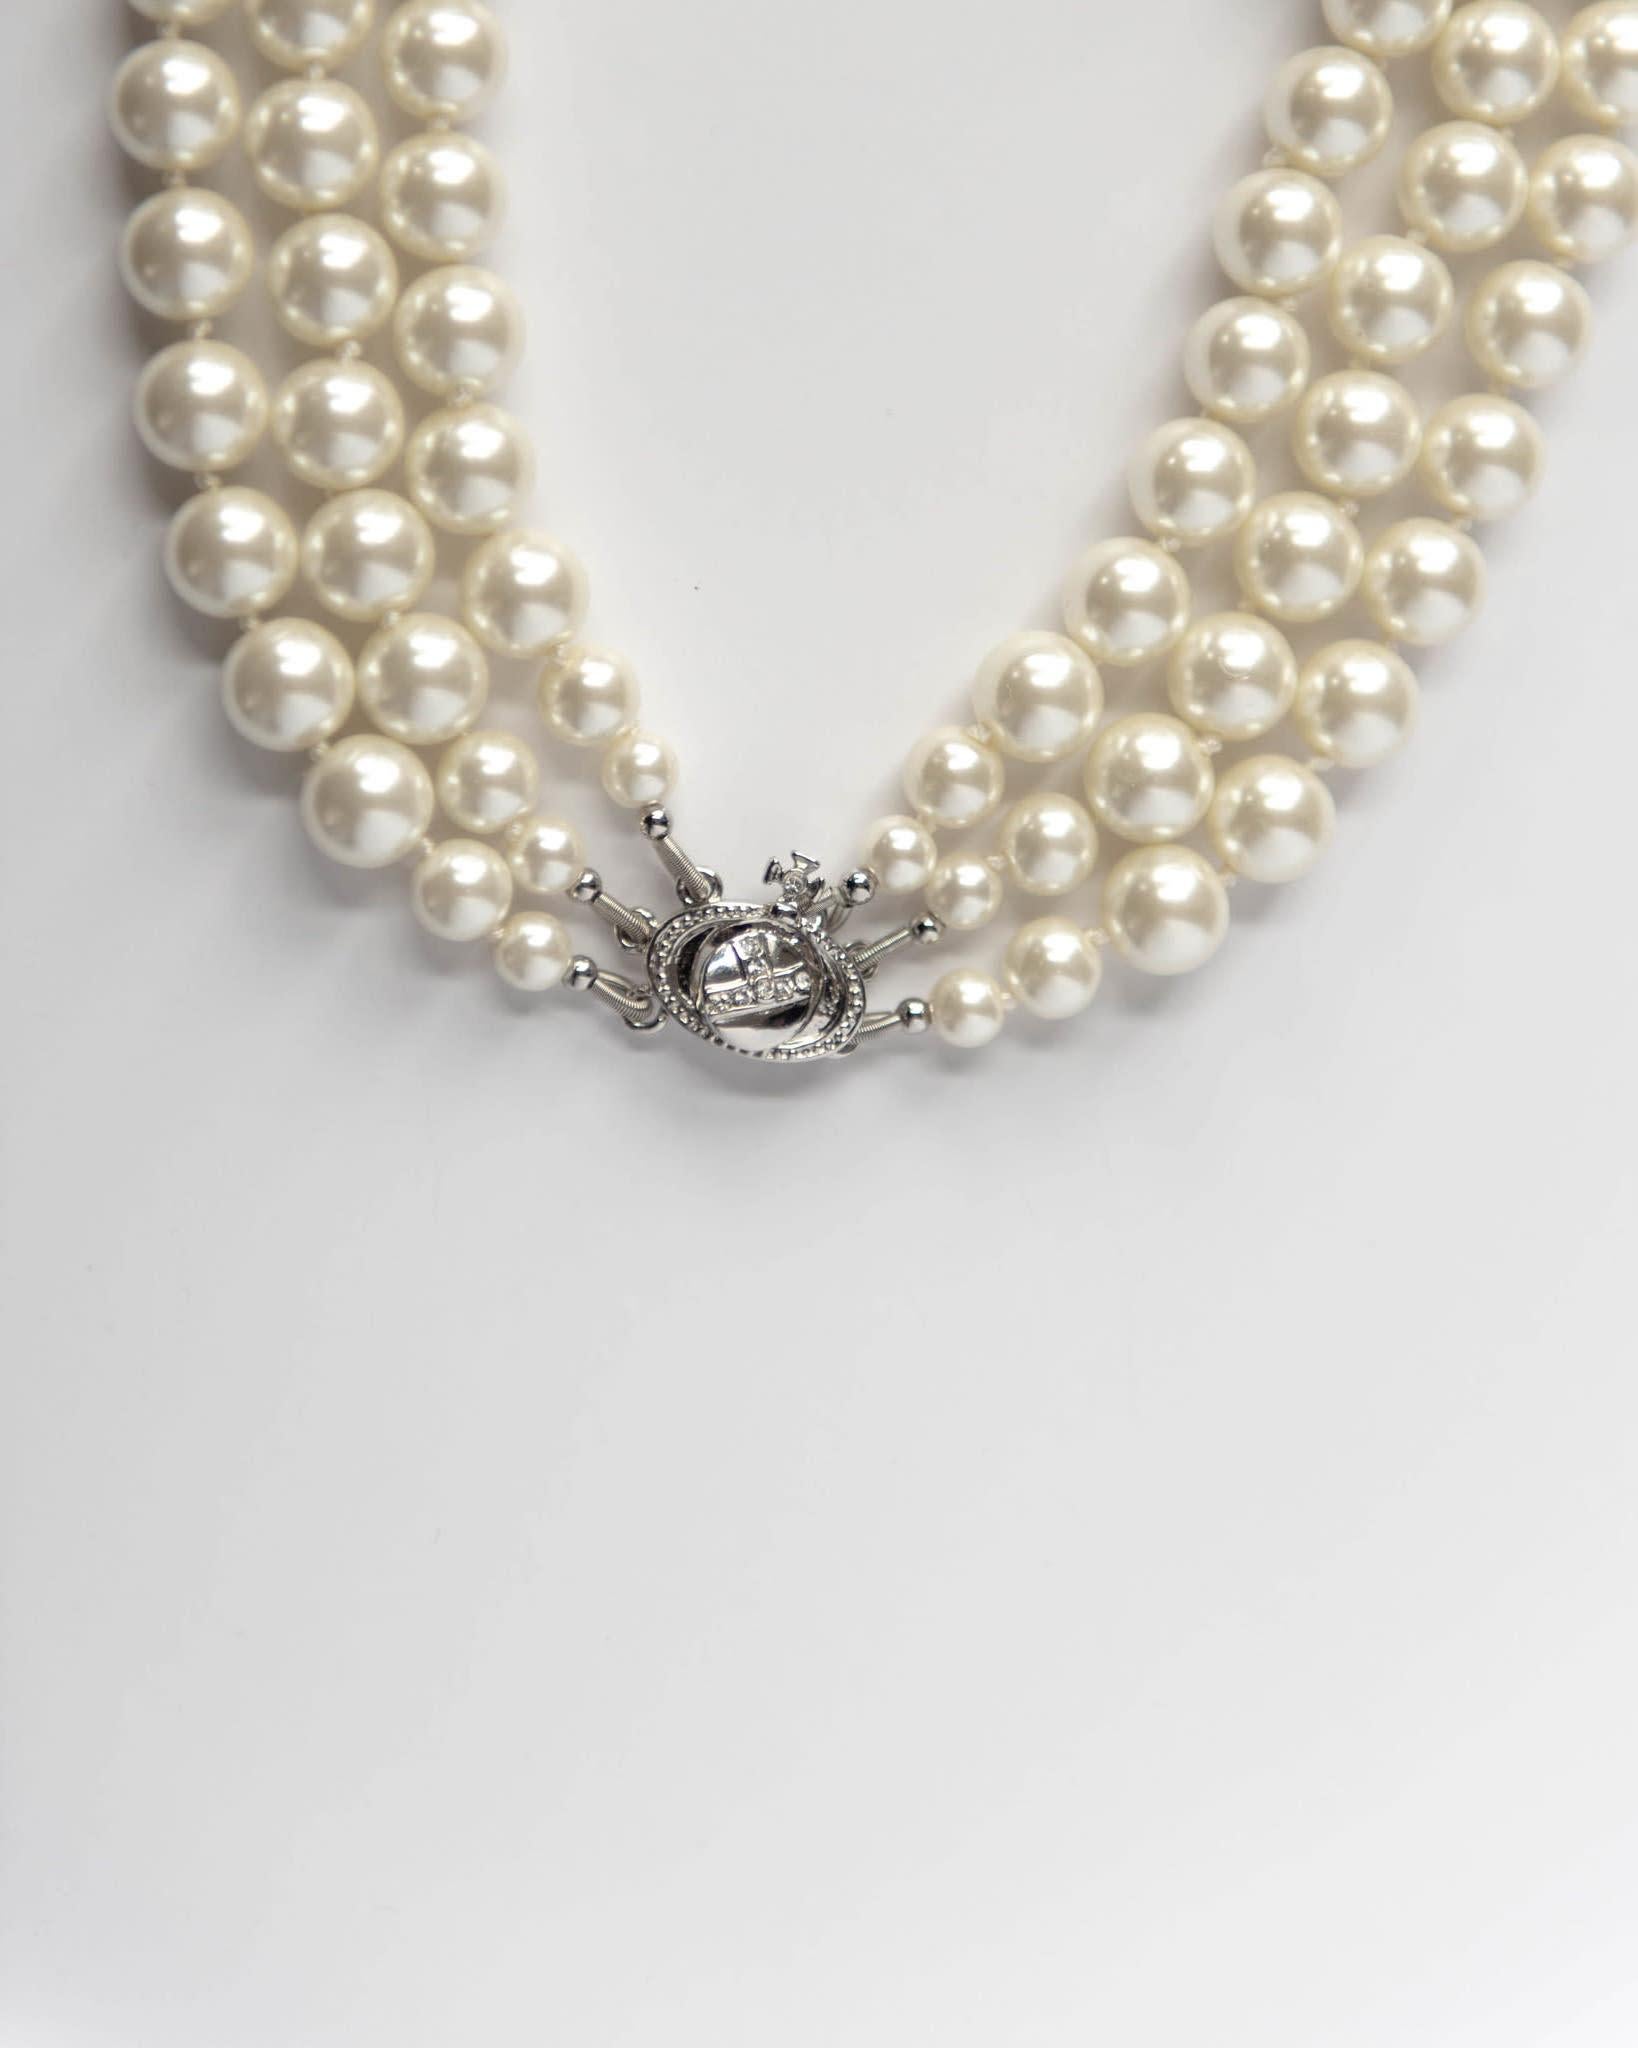 The iconic Vivienne Westwood pearl collection from decades ago is revisited. The sliver-tone three row pearl choker is hard knotted with rows of Swarovski pearls and set with the encrusted Orb at the centre. It’s deigned to hug the neck in true